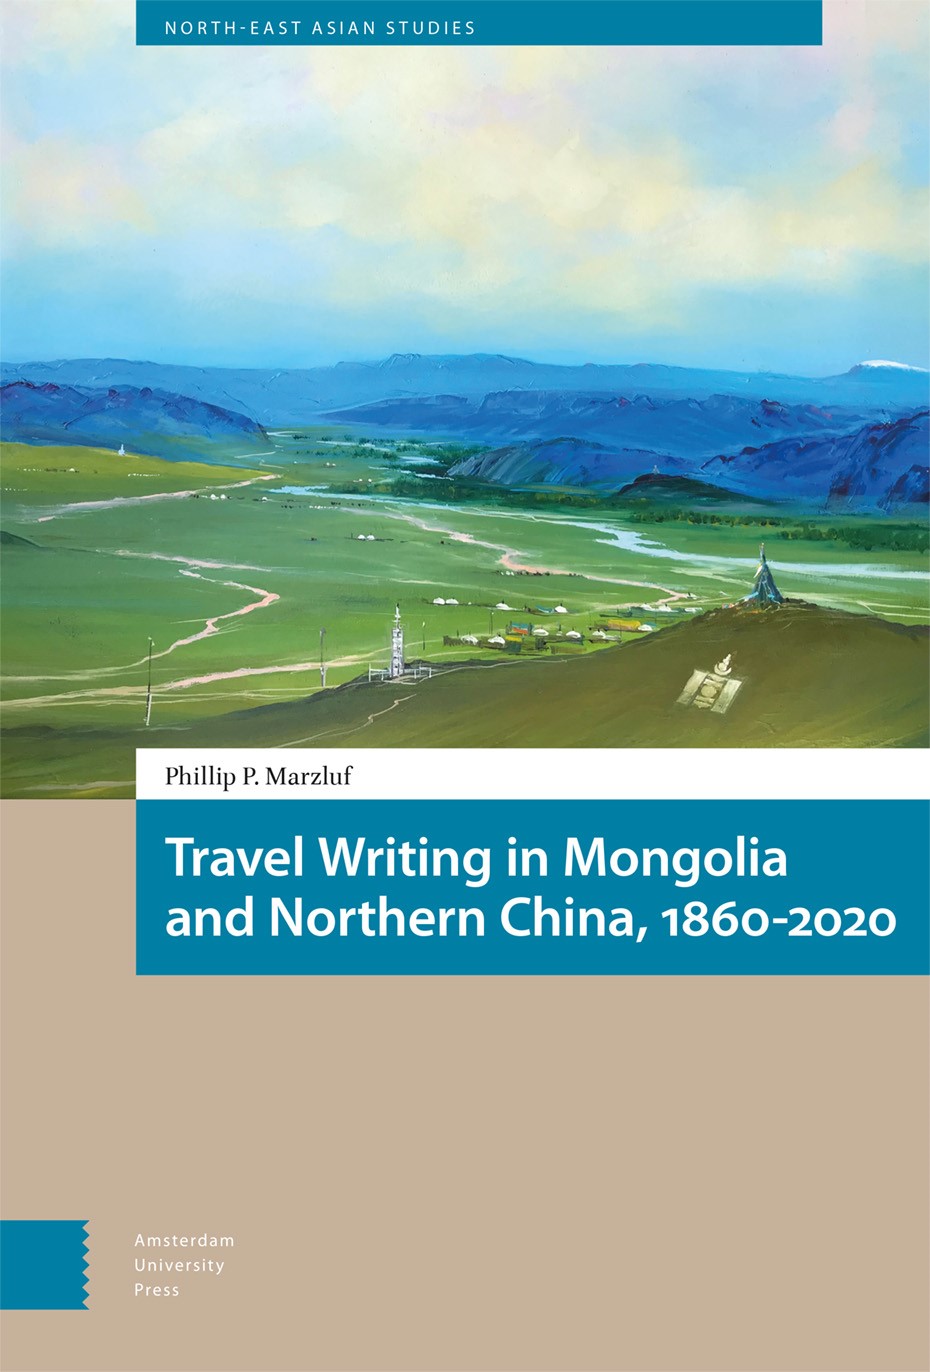 Language, Literacy, and Social Change in Mongolia (book cover)